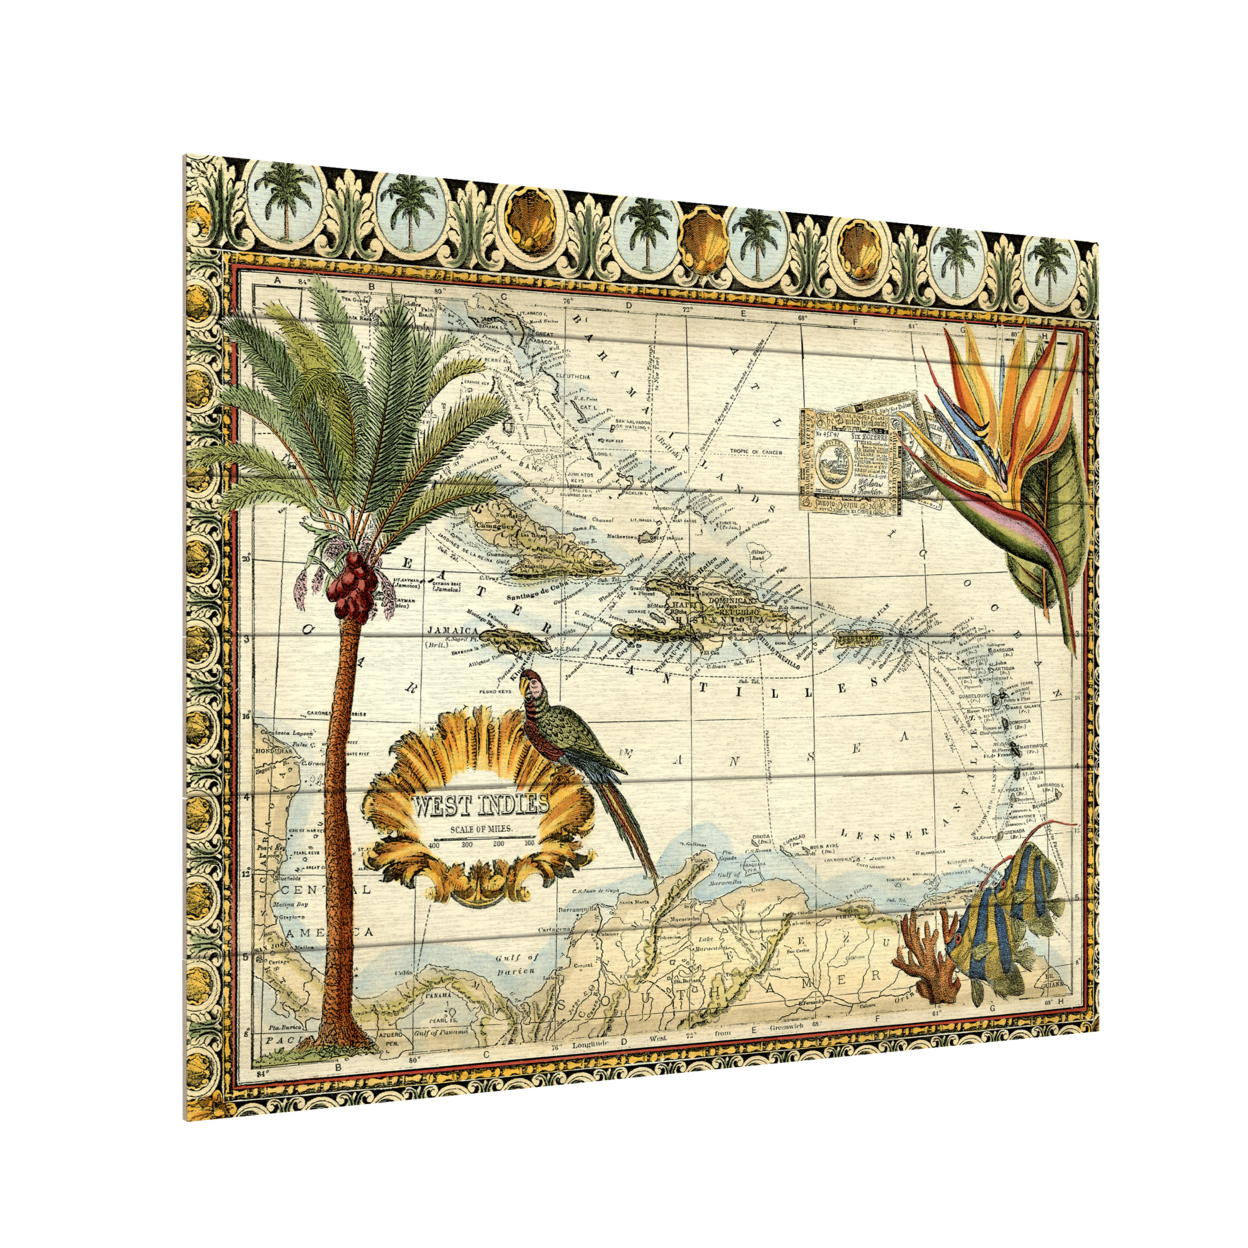 Wooden Slat Art 18 X 22 Inches Titled Tropical Map Of West Indies Ready To Hang Home Decor Picture